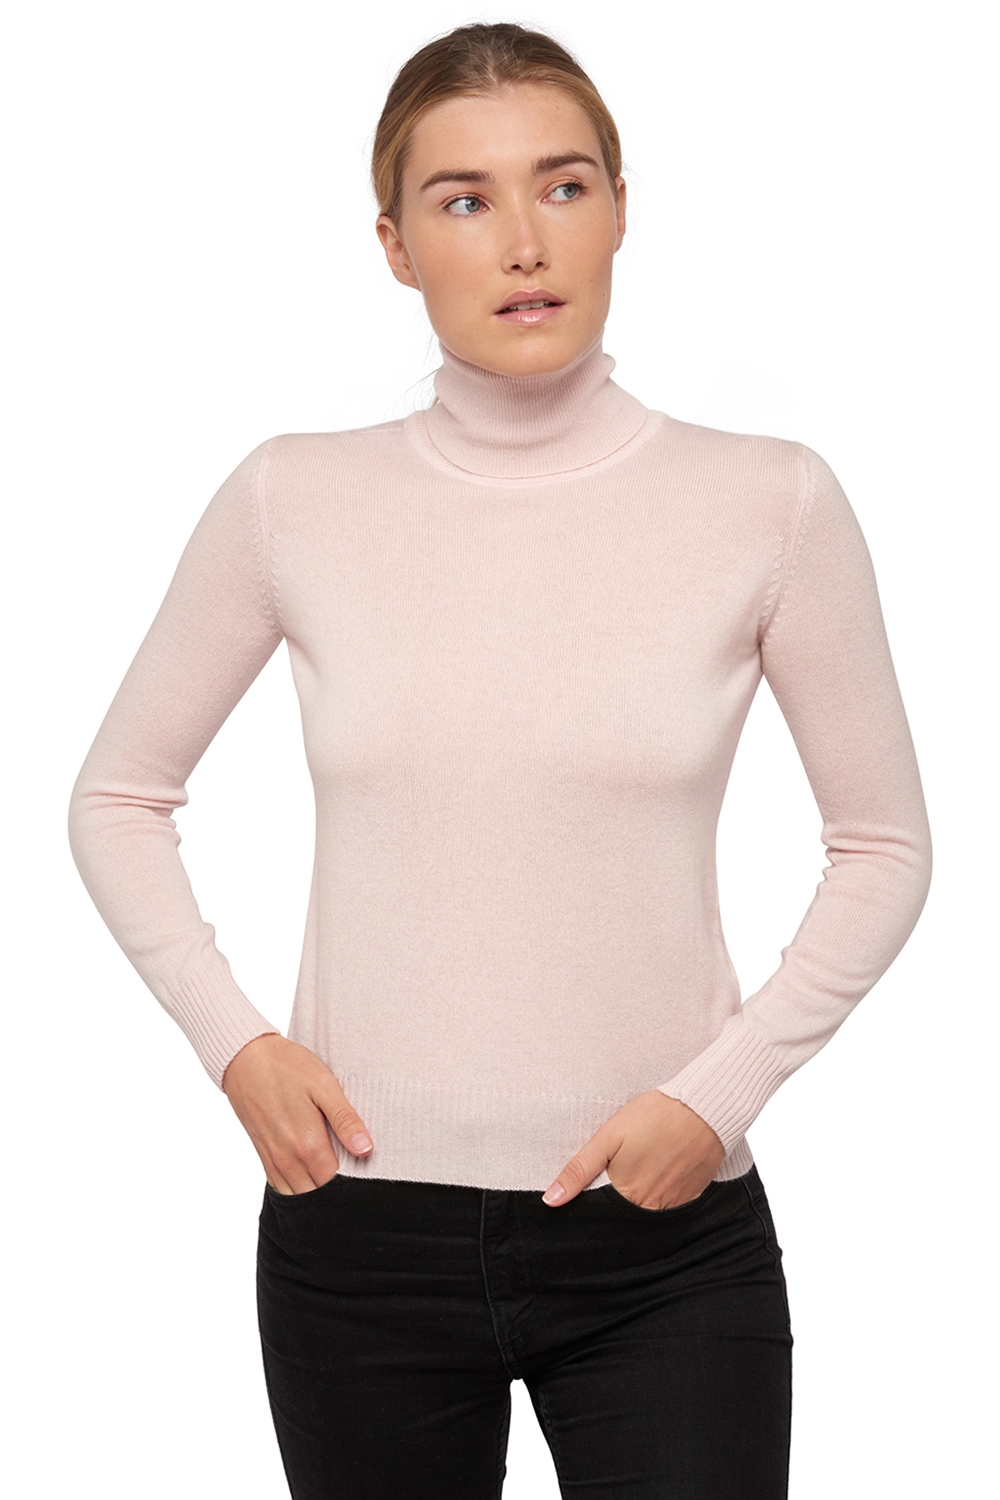 Cachemire pull femme col roule lili rose pale 2xl